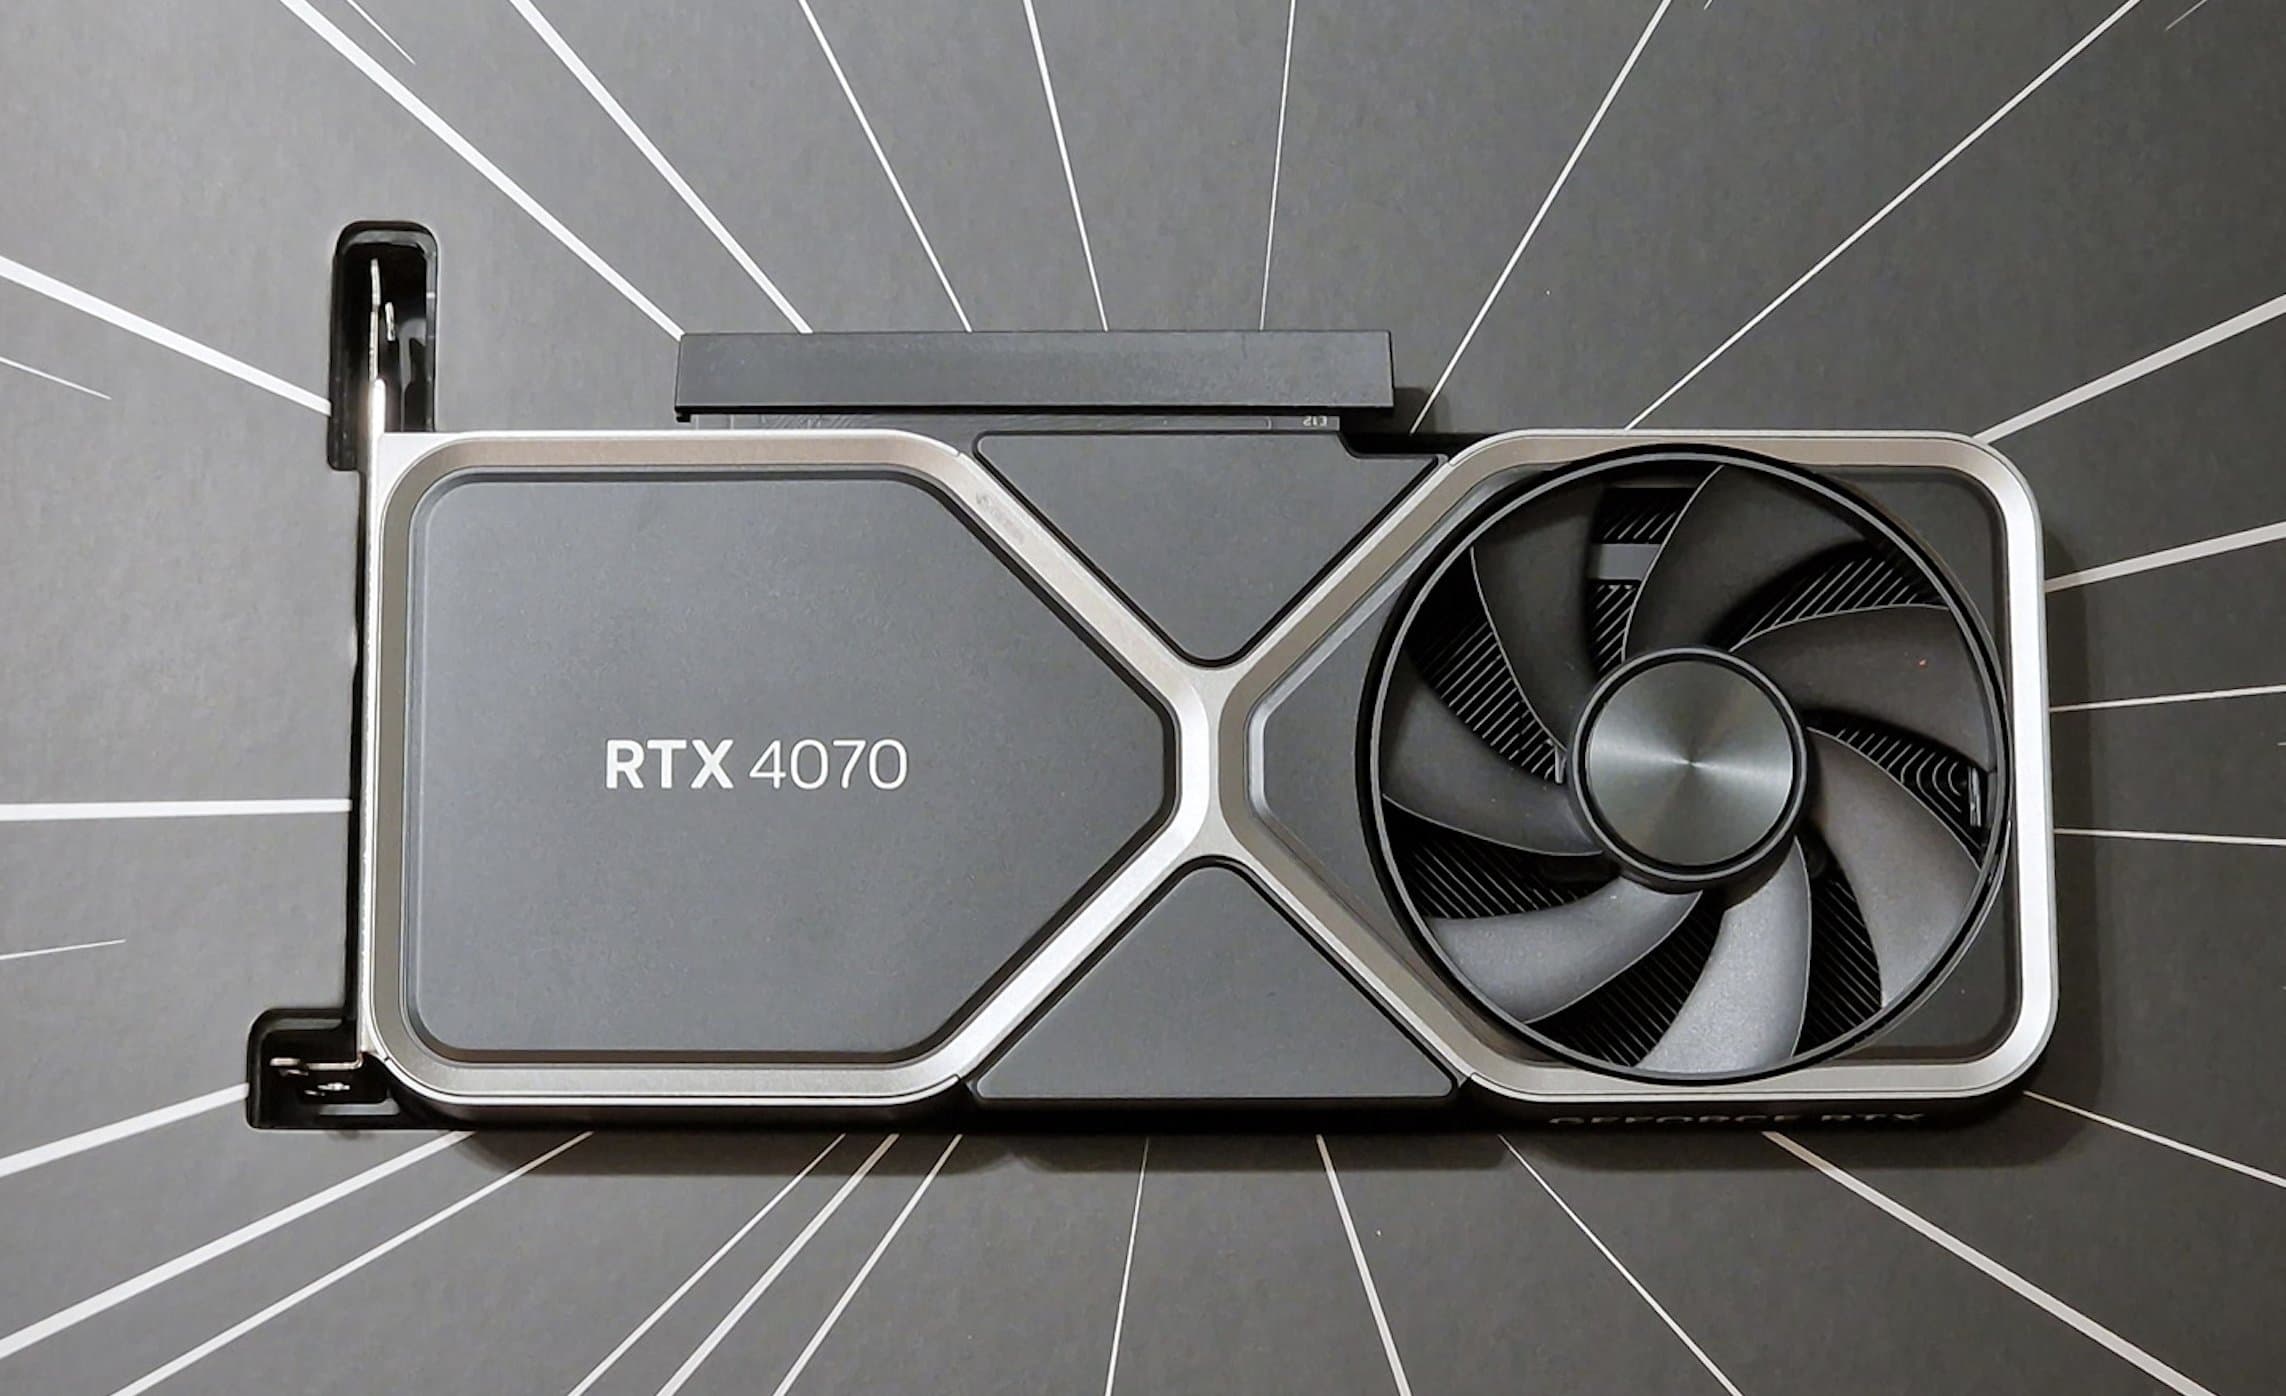 NVIDIA GeForce RTX 4070 Founders Edition